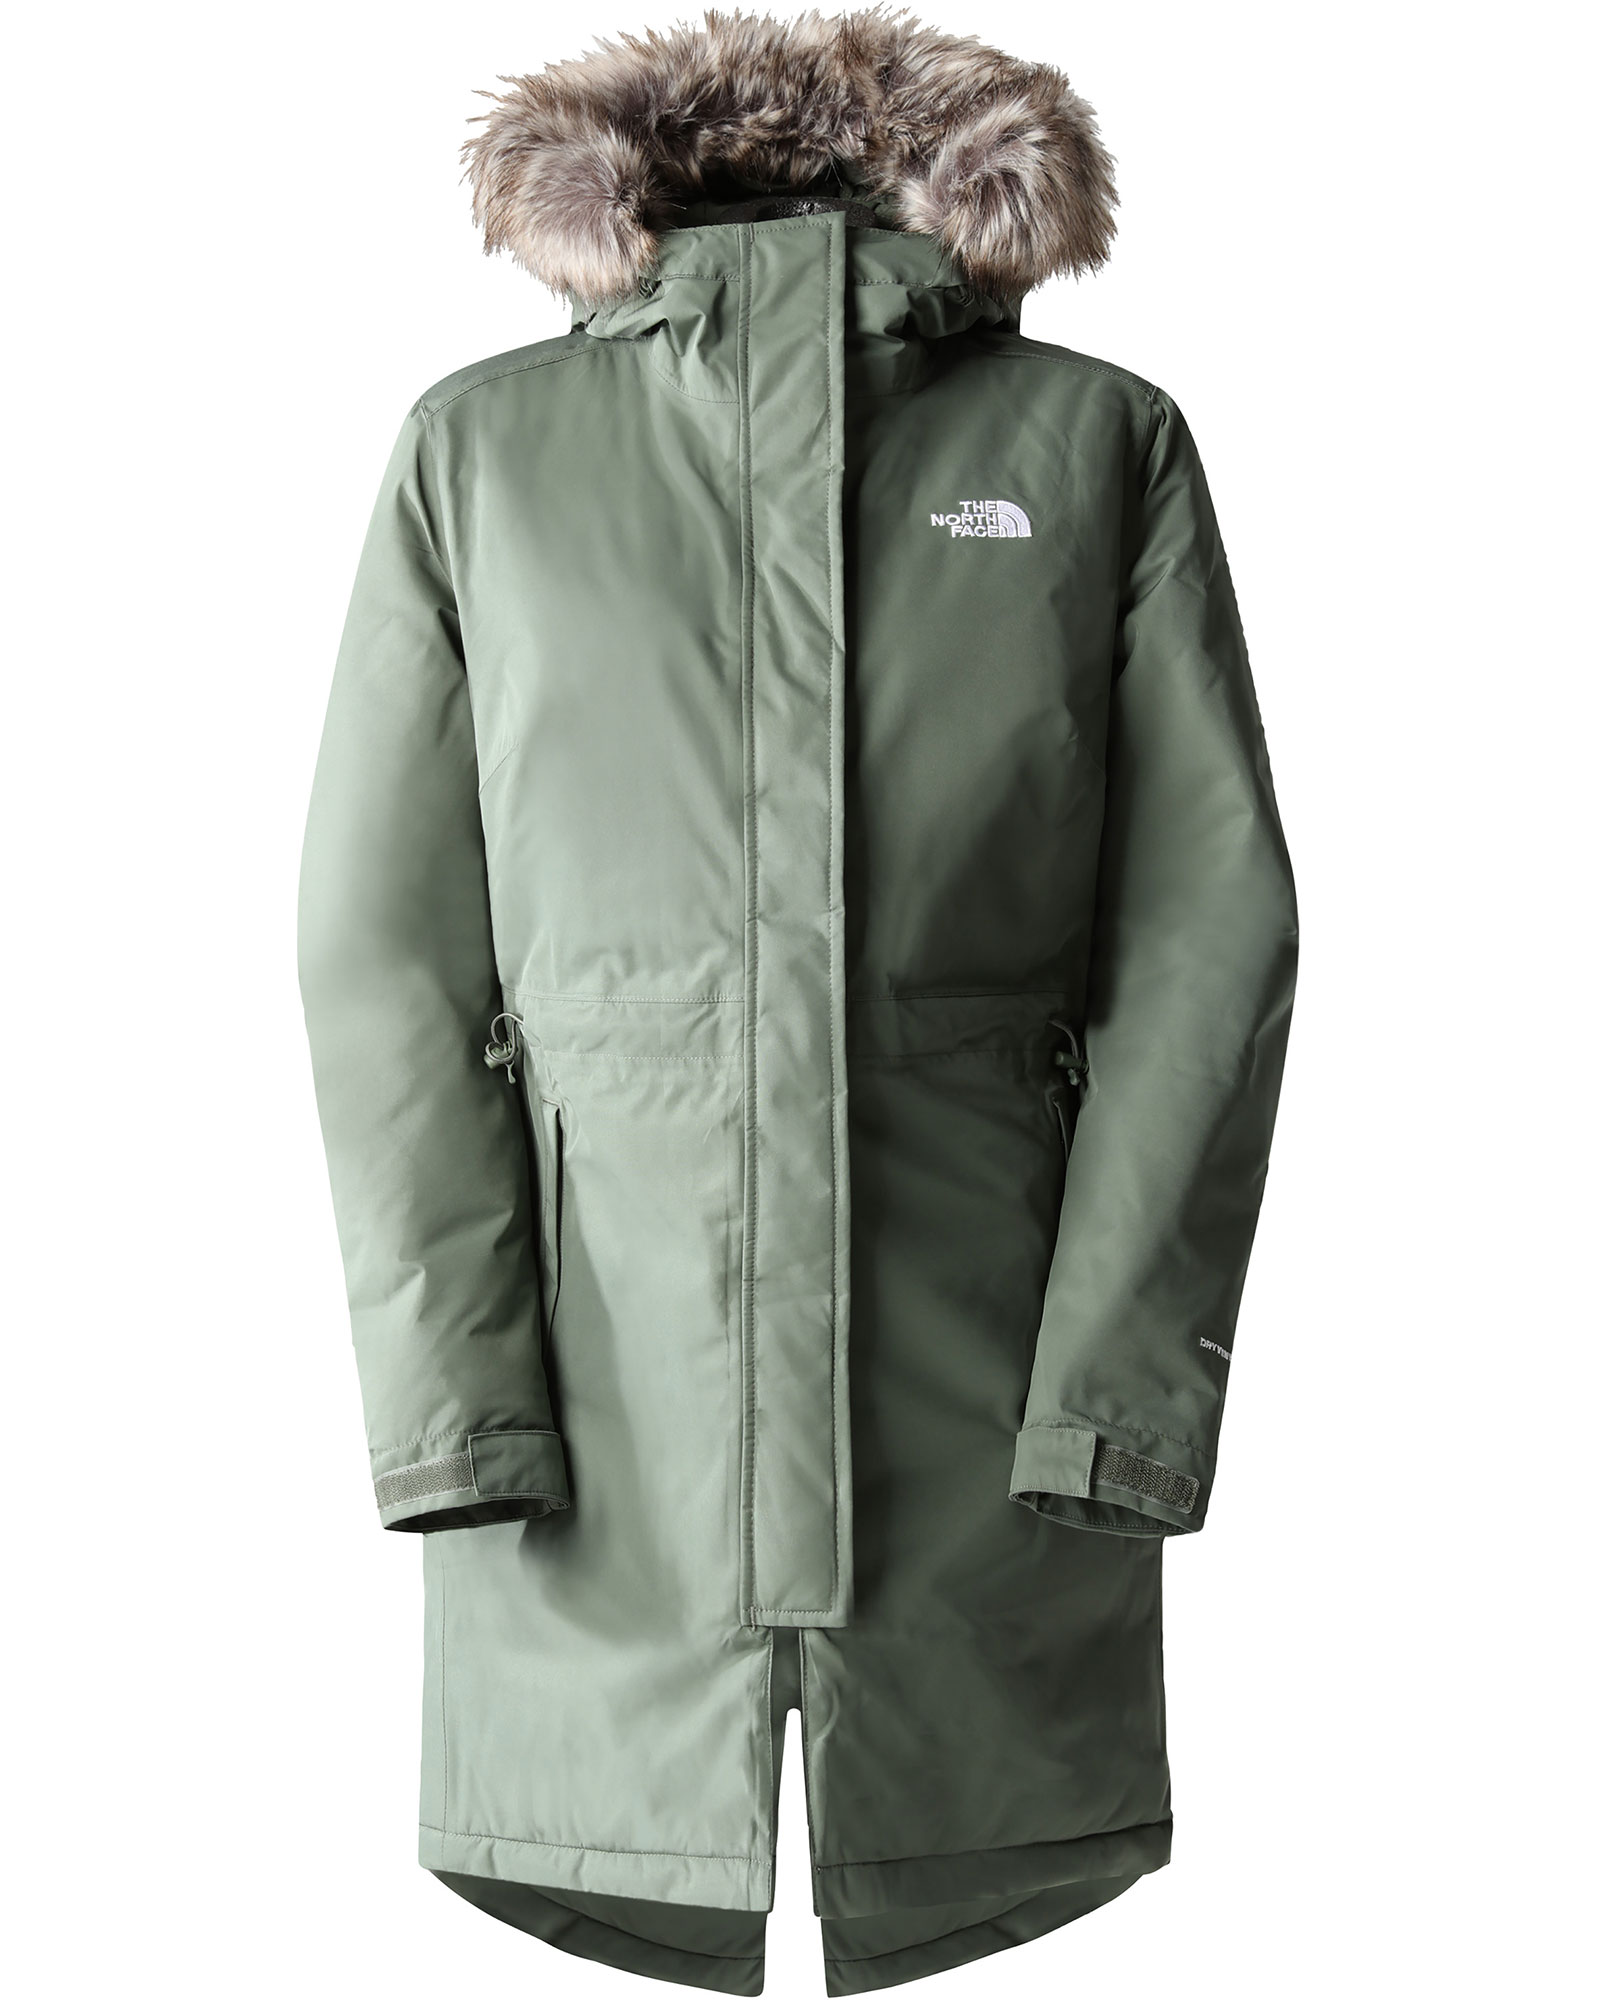 The North Face Zaneck Women’s Parka Jacket - Thyme S